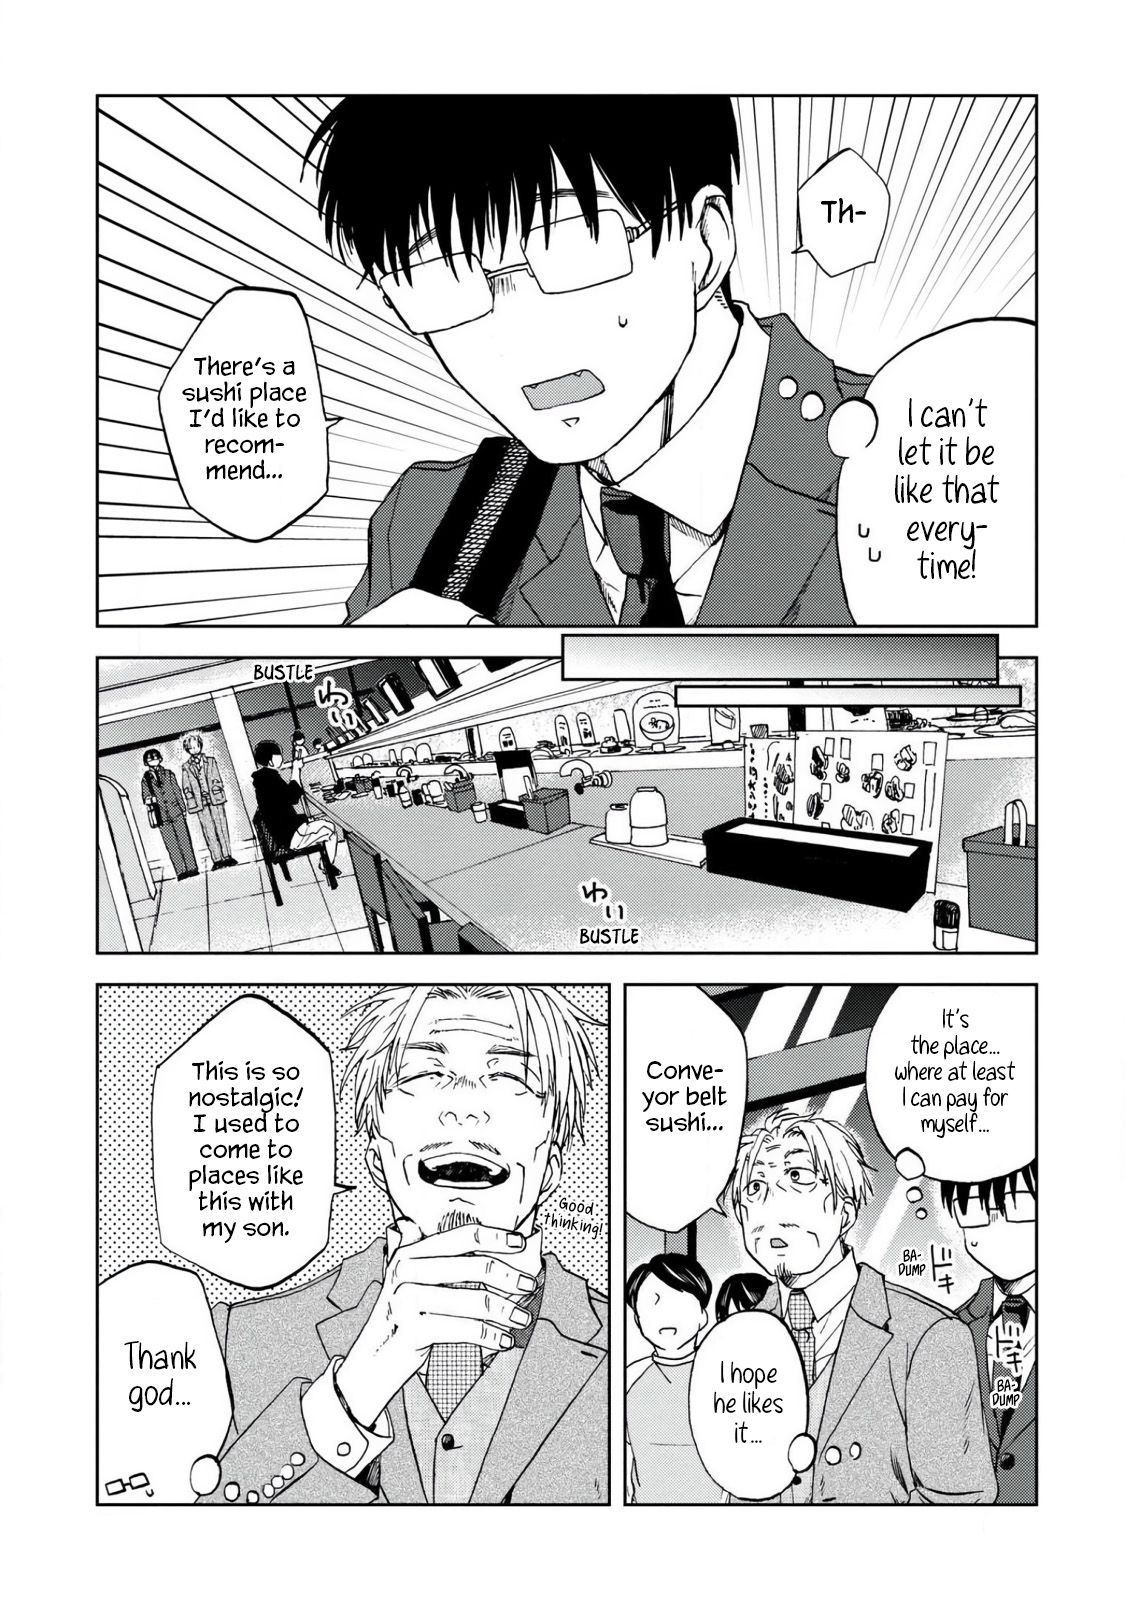 Meshinuma Vol.4 Chapter 51: Conveyor Belt Sushi... Thank You For The Treat - Picture 3